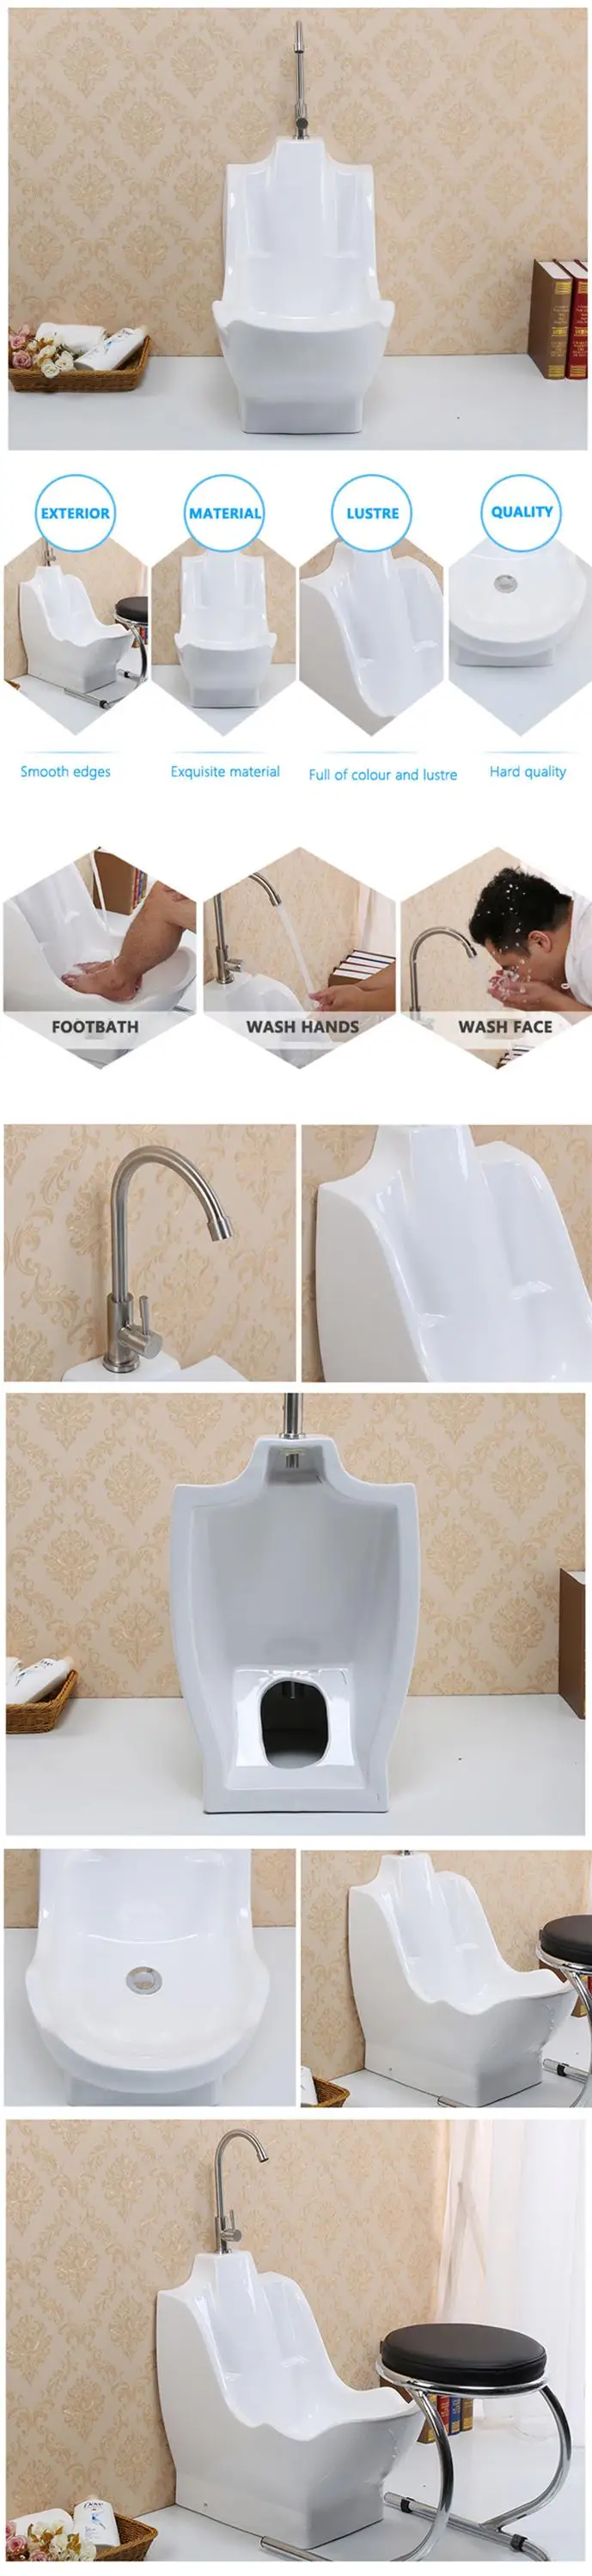 China Supplier New Design Uk Best Selling Products Wudu Basin View Basin Doooway Product Details From Chaozhou Doooway Sanitary Ware Factory On